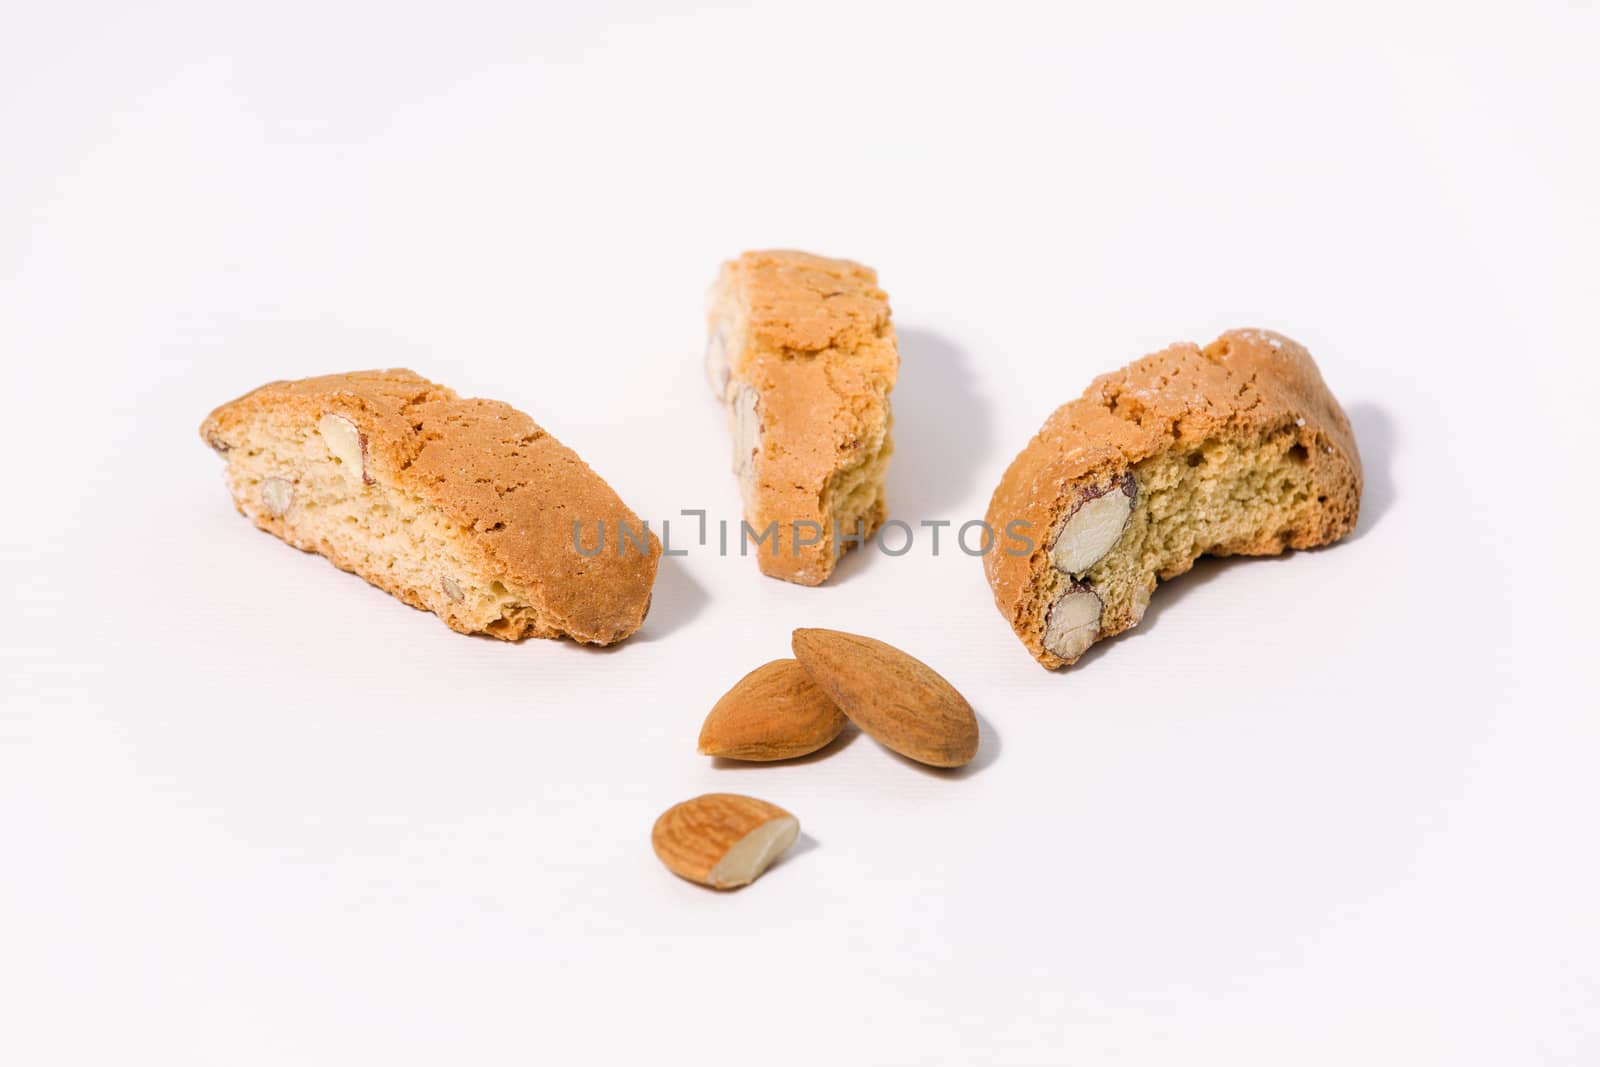 Three almond cantuccini and three almonds on white background